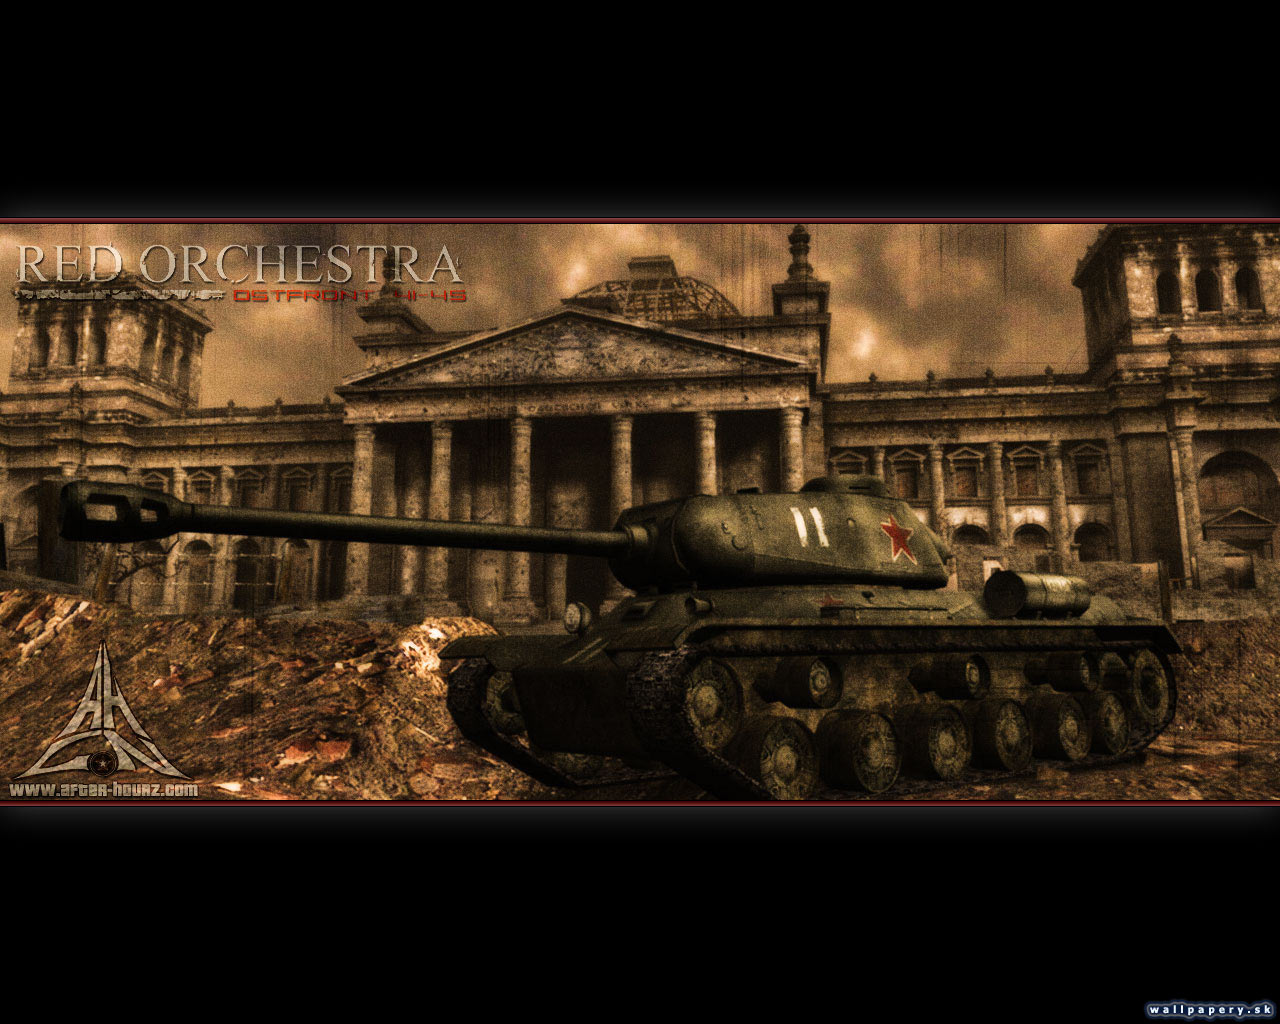 Red Orchestra: Ostfront 41-45 - wallpaper 17